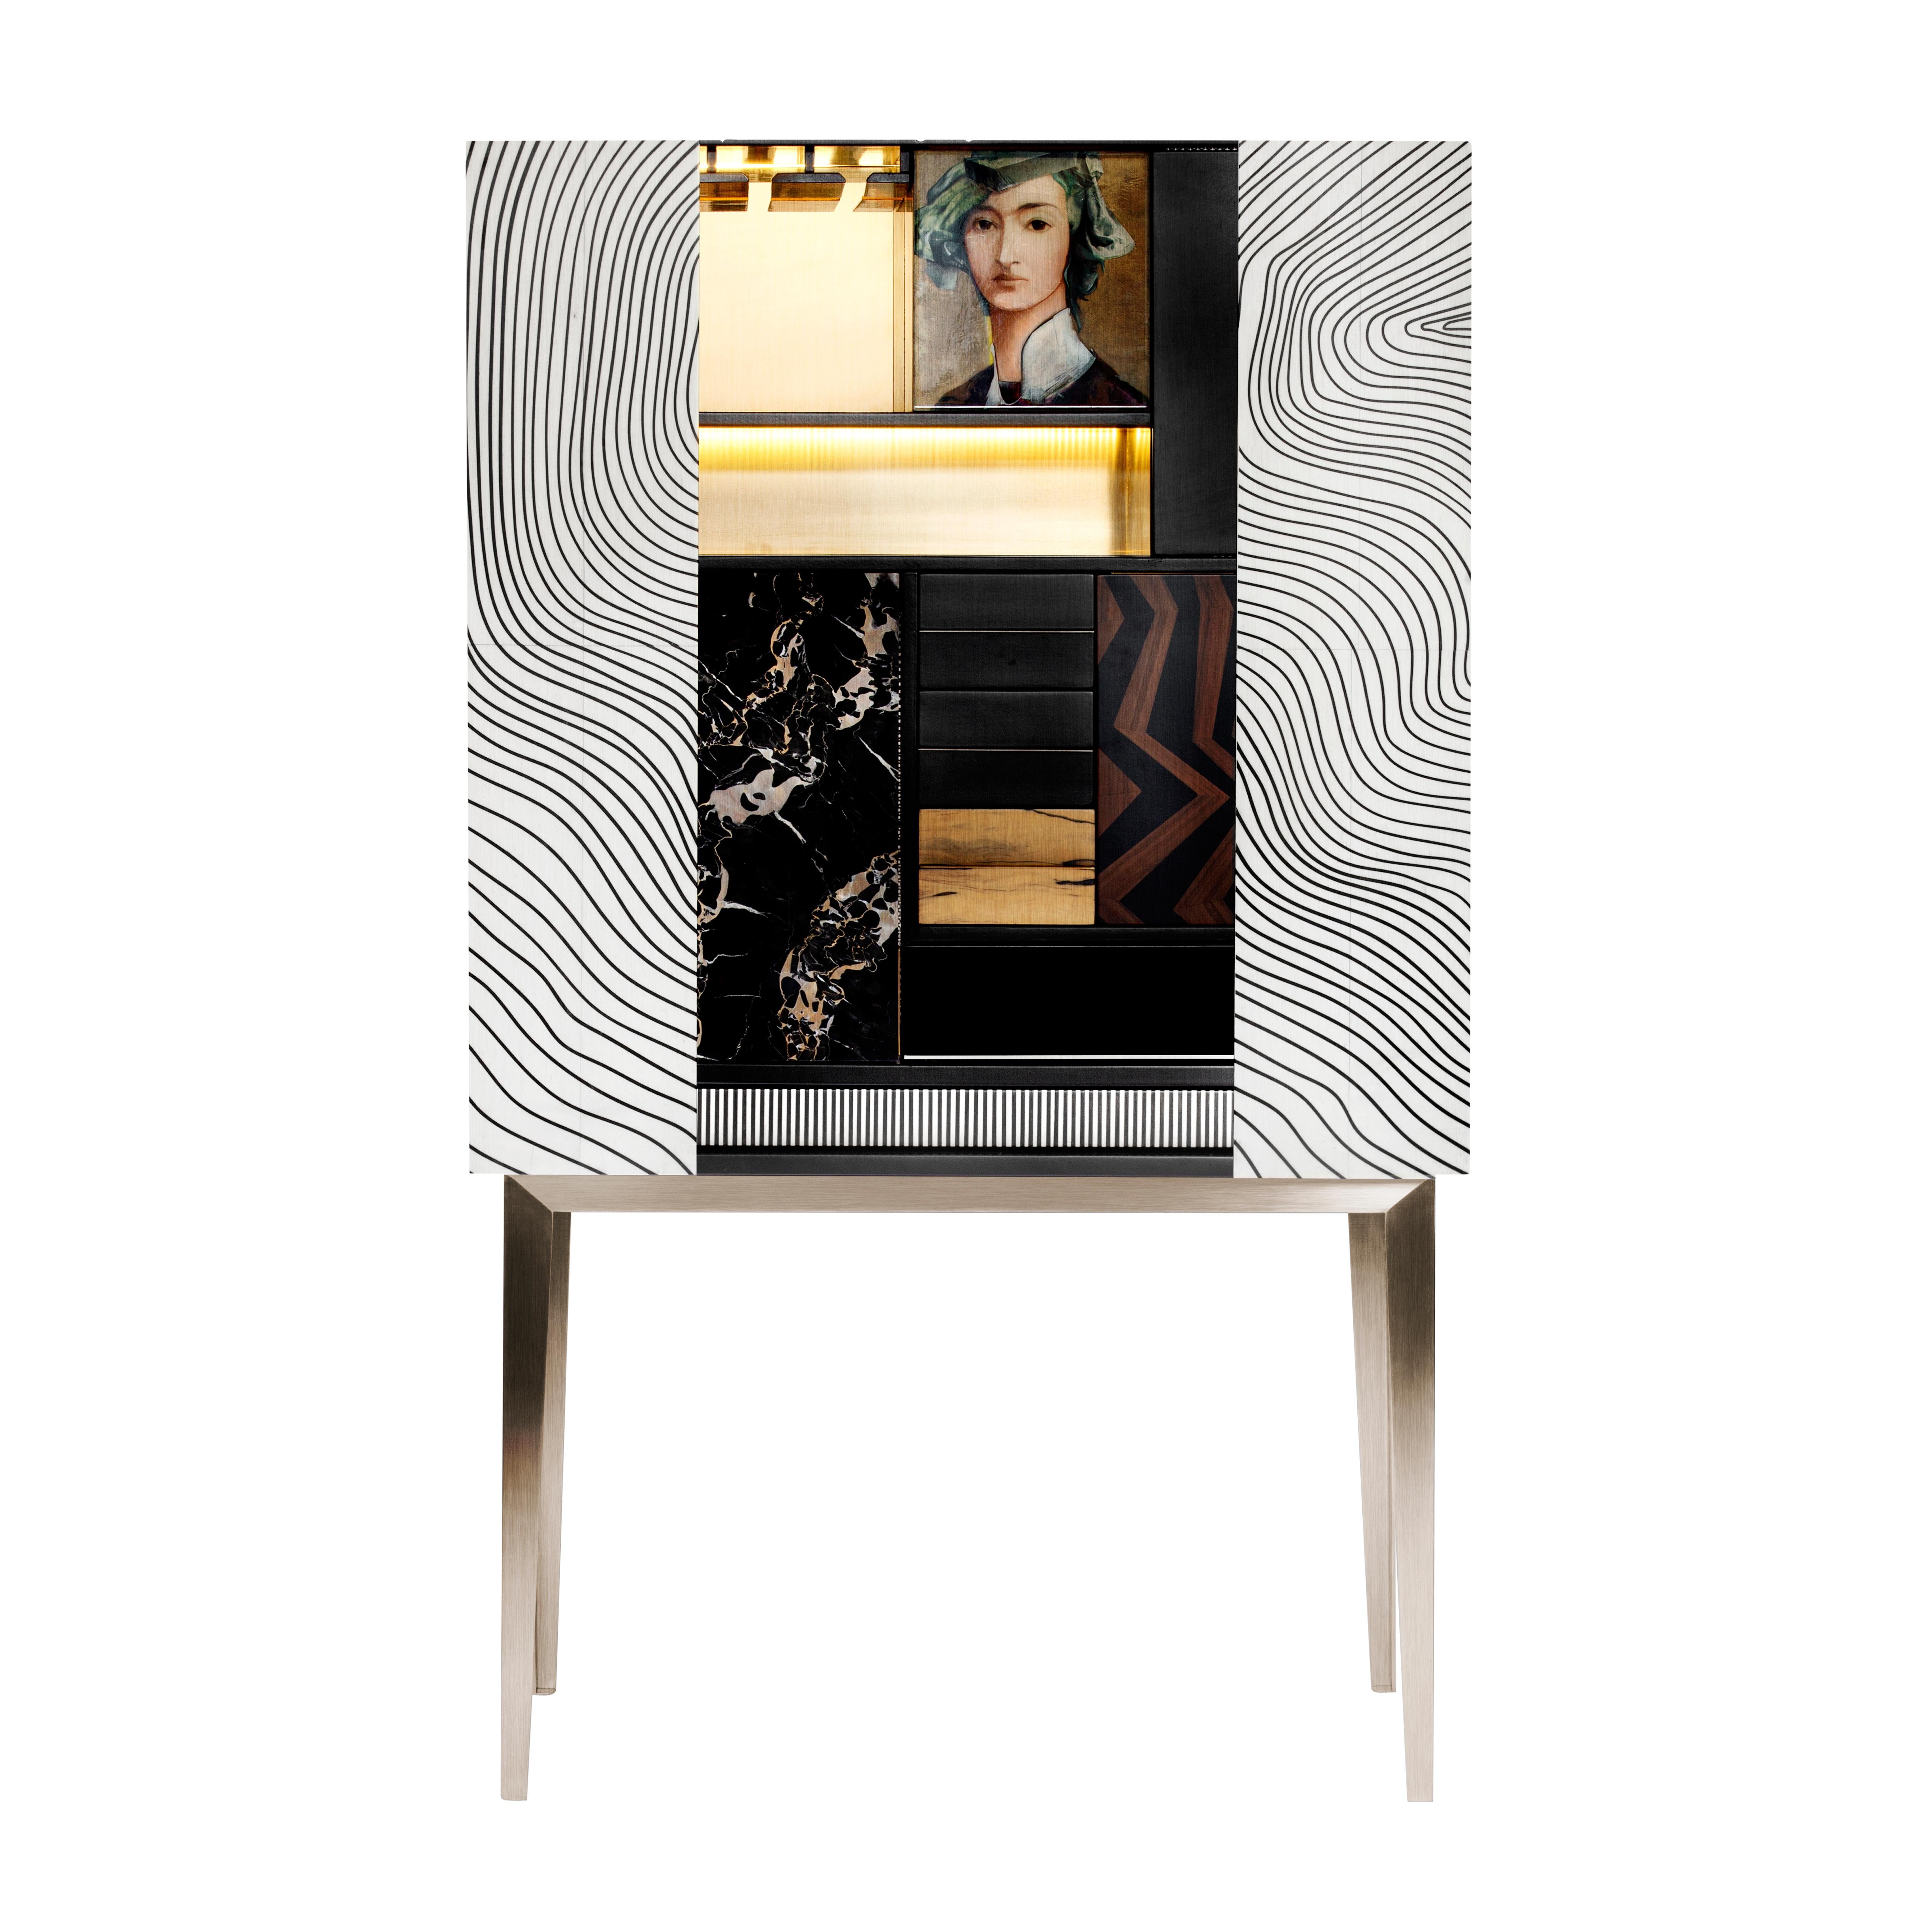 Italian 21st Century Majord’home Bar Cabinet, Maple and Ebony Inlays, Made in Italy For Sale